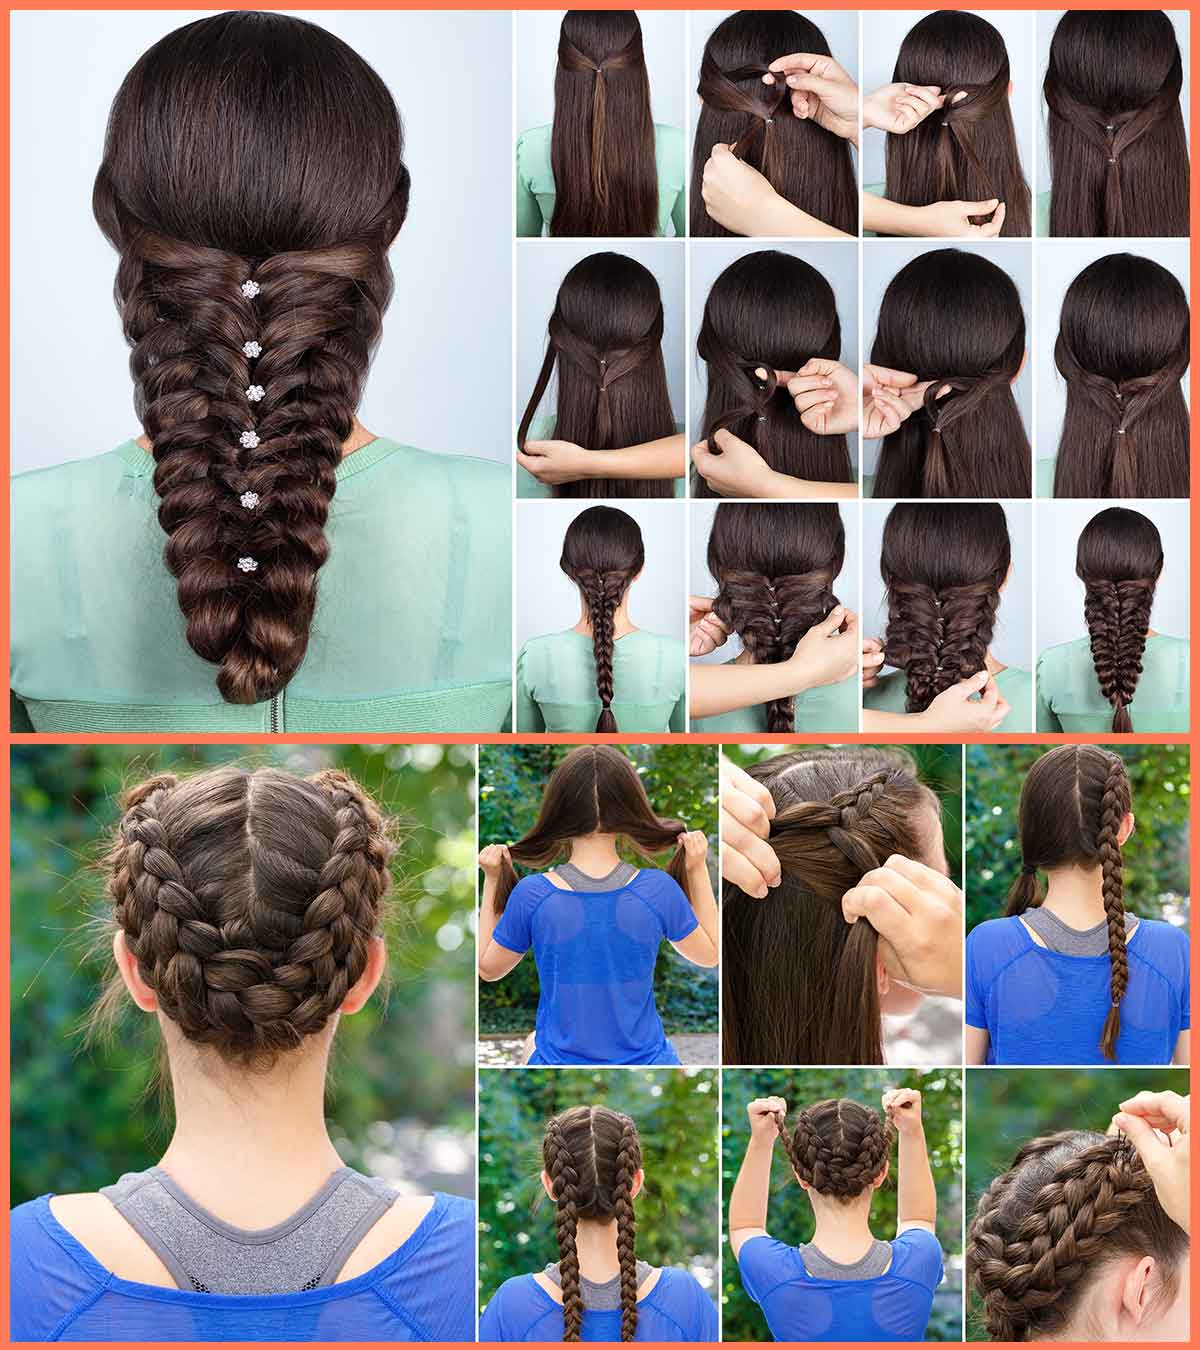 Simple  cute school hairstylehairstyle in 2 plateshairstyle for school  studentsback to school  YouTube